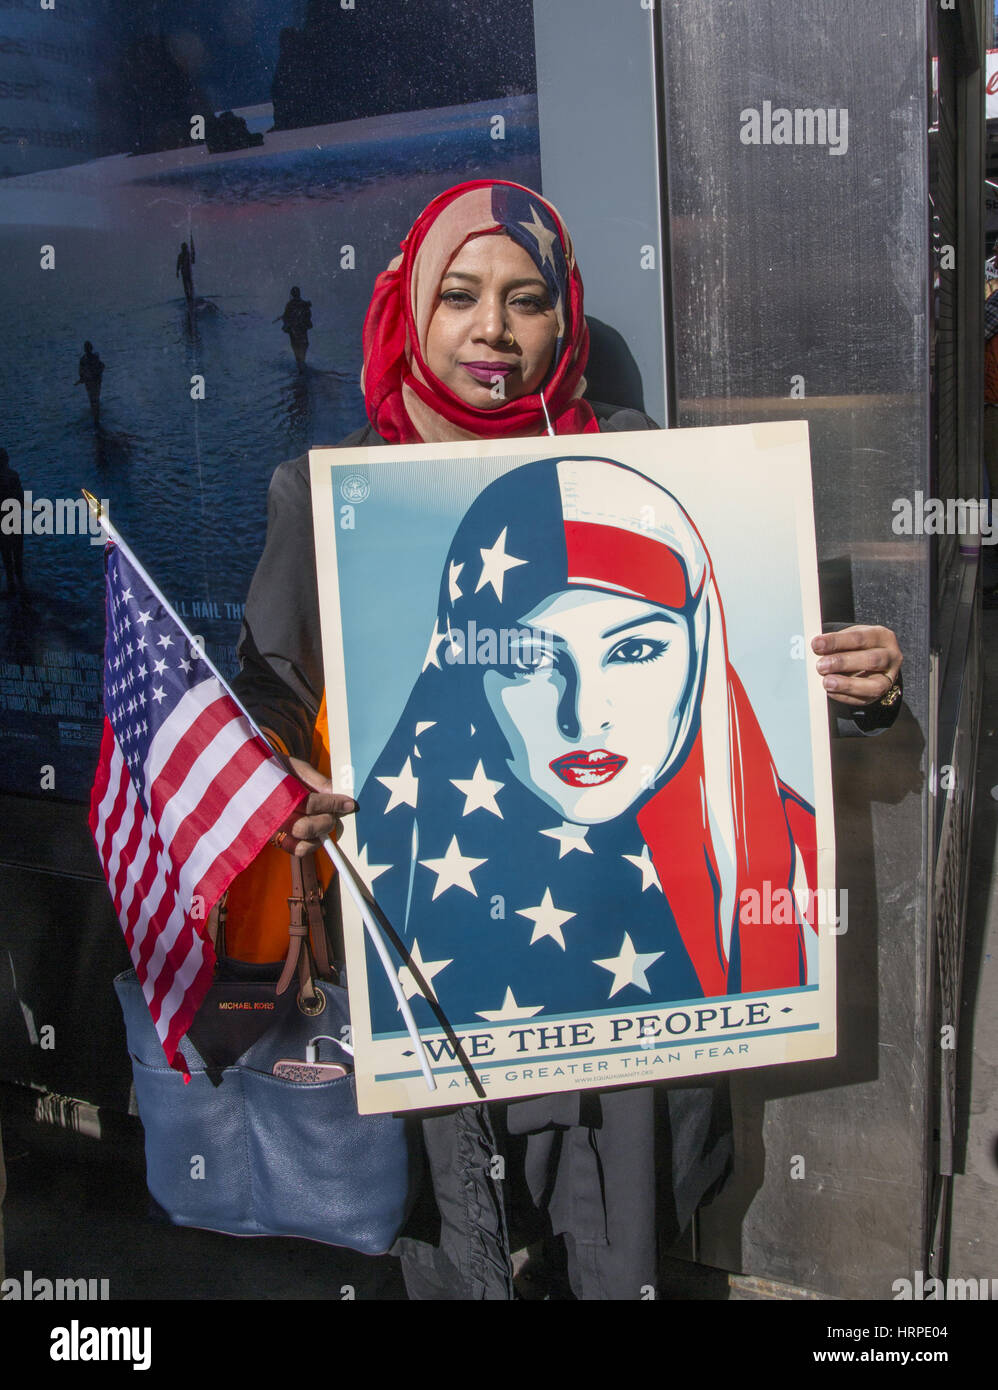 New Yorkers turned out in large numbers to support the 'I Am A Muslim' demonstration in Times Square in support of the Muslim community and to protest the Trump Administration immigration policies. Stock Photo